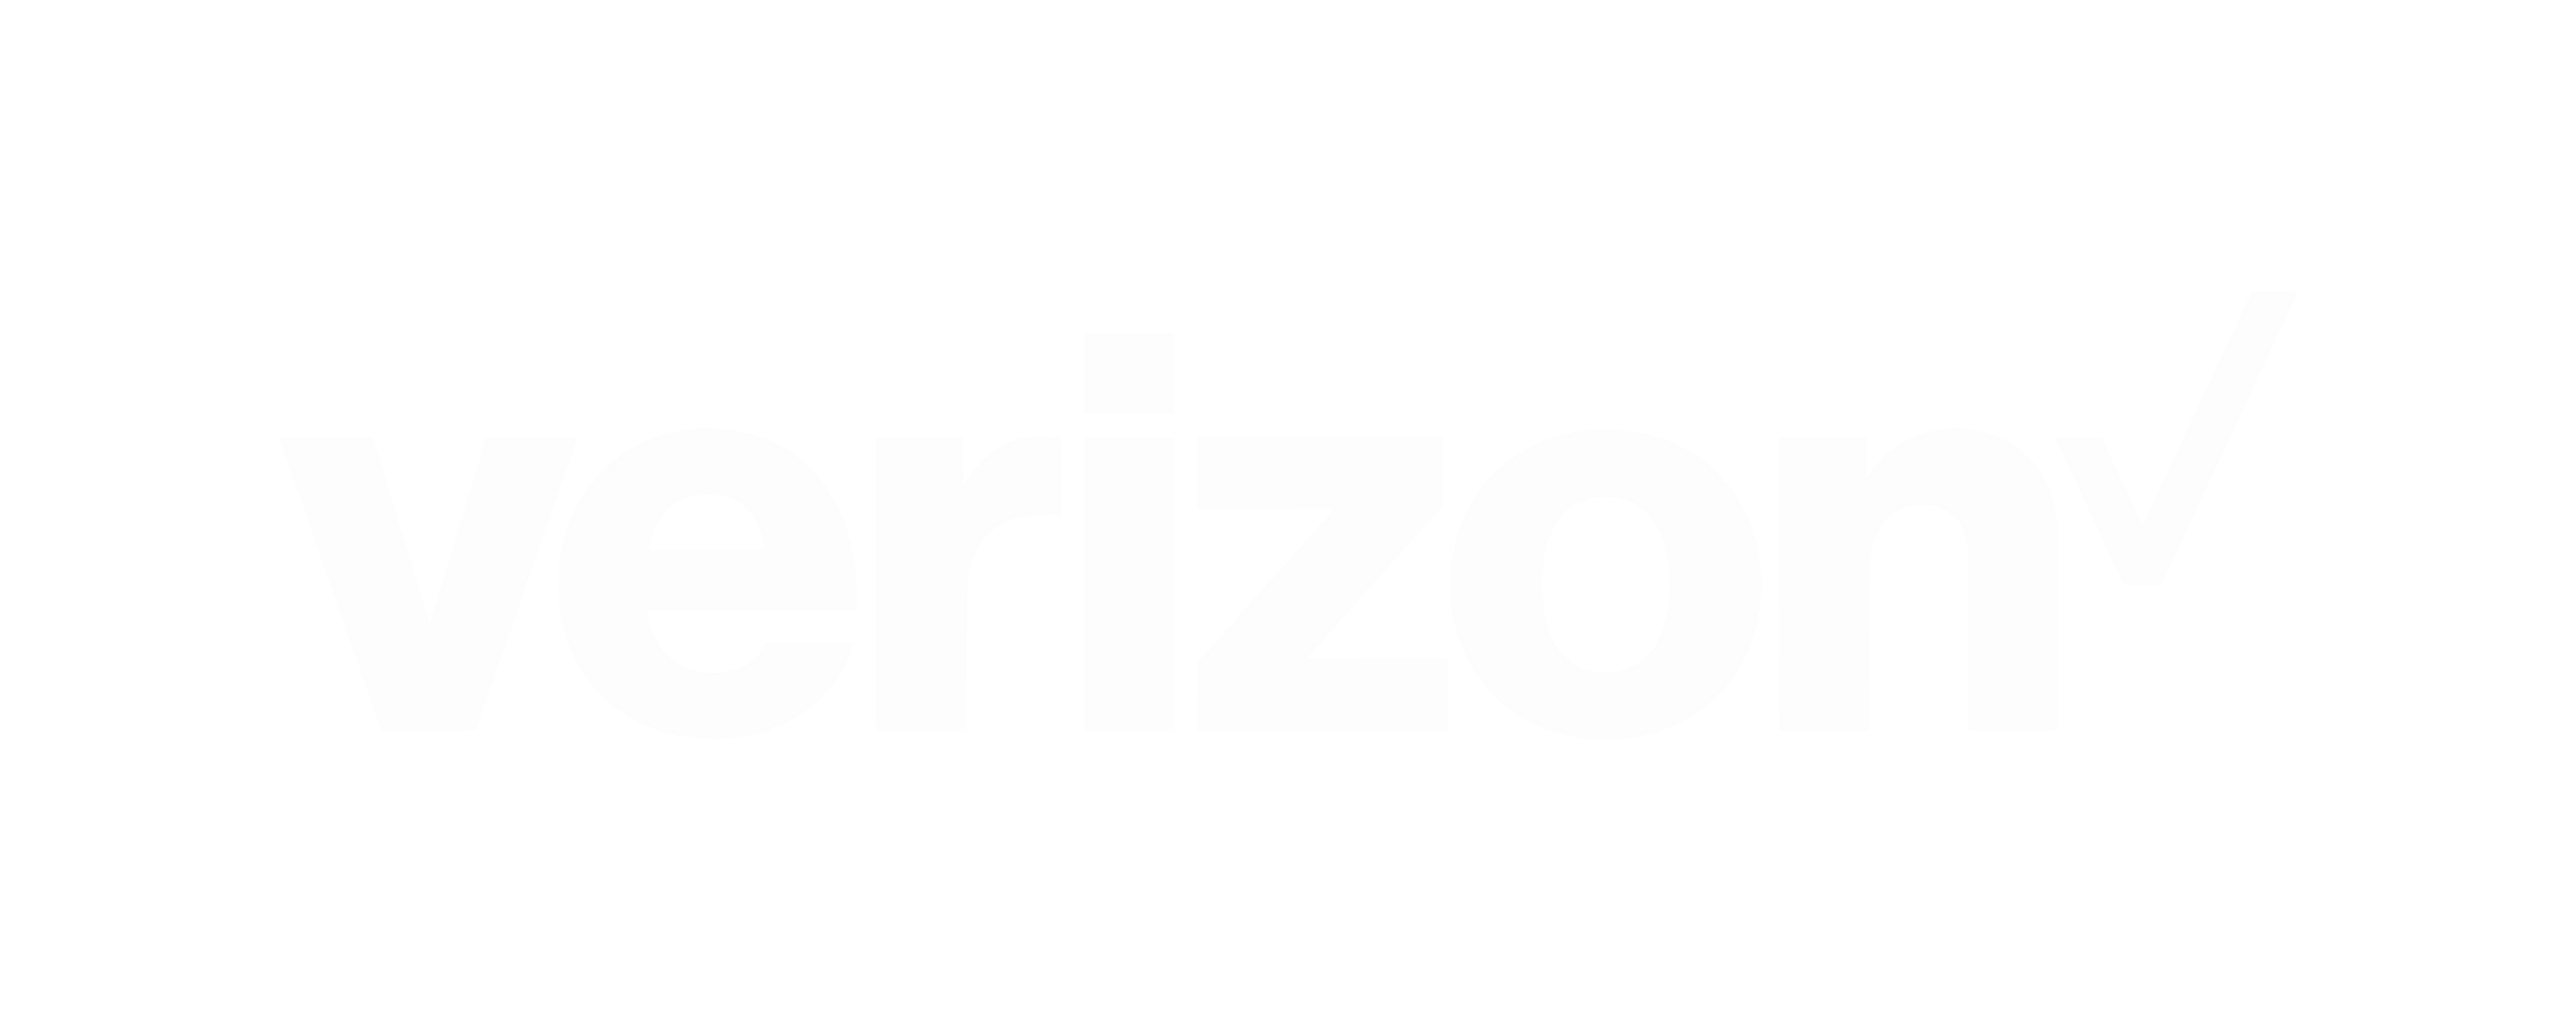 The Verizon logo in white, on a transparent background.